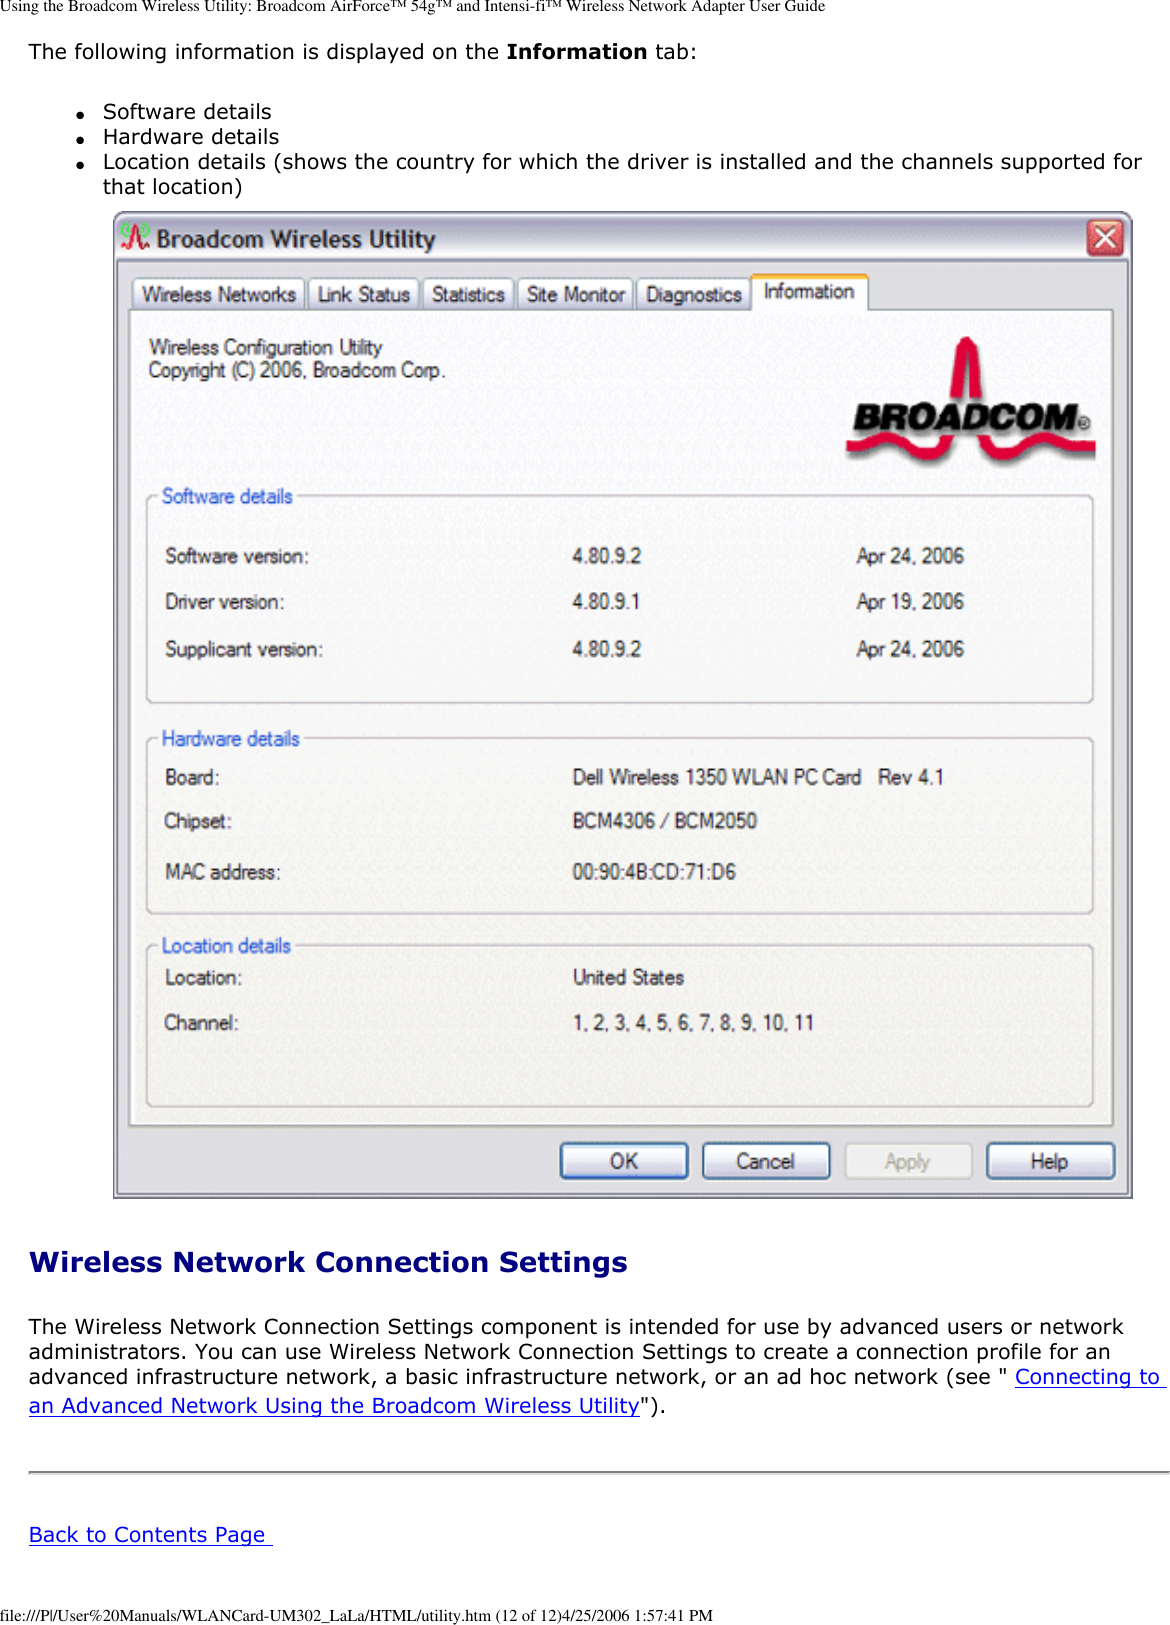 Using the Broadcom Wireless Utility: Broadcom AirForce™ 54g™ and Intensi-fi™ Wireless Network Adapter User GuideThe following information is displayed on the Information tab: ●Software details ●Hardware details ●Location details (shows the country for which the driver is installed and the channels supported for that location) Wireless Network Connection Settings The Wireless Network Connection Settings component is intended for use by advanced users or network administrators. You can use Wireless Network Connection Settings to create a connection profile for an advanced infrastructure network, a basic infrastructure network, or an ad hoc network (see &quot; Connecting to an Advanced Network Using the Broadcom Wireless Utility&quot;).  Step 1: Installing the Software  NOTE: This installation is required before you insert the module into the USB port of your computer. 1. Insert the Bluetooth USB Module installation compact disc (CD) into the CD-ROM or DVD drive of your computer. 2. If the Main Menu screen appears automatically, select Install software and click OK. If the Main Menu screen does not appear automatically, click Start, click Run, type x:\setup.exe (where x is the CD-ROM or DVD drive letter of your computer), and click OK. 3. Click Next, click Finish, and then restart your computer. 4. Right-click the Bluetooth icon  in the taskbar notification area (system tray) and click Start Using Bluetooth. Follow the instructions provided by the Initial Bluetooth Configuration Wizard.  Back to Contents Page file:///P|/User%20Manuals/WLANCard-UM302_LaLa/HTML/utility.htm (12 of 12)4/25/2006 1:57:41 PM